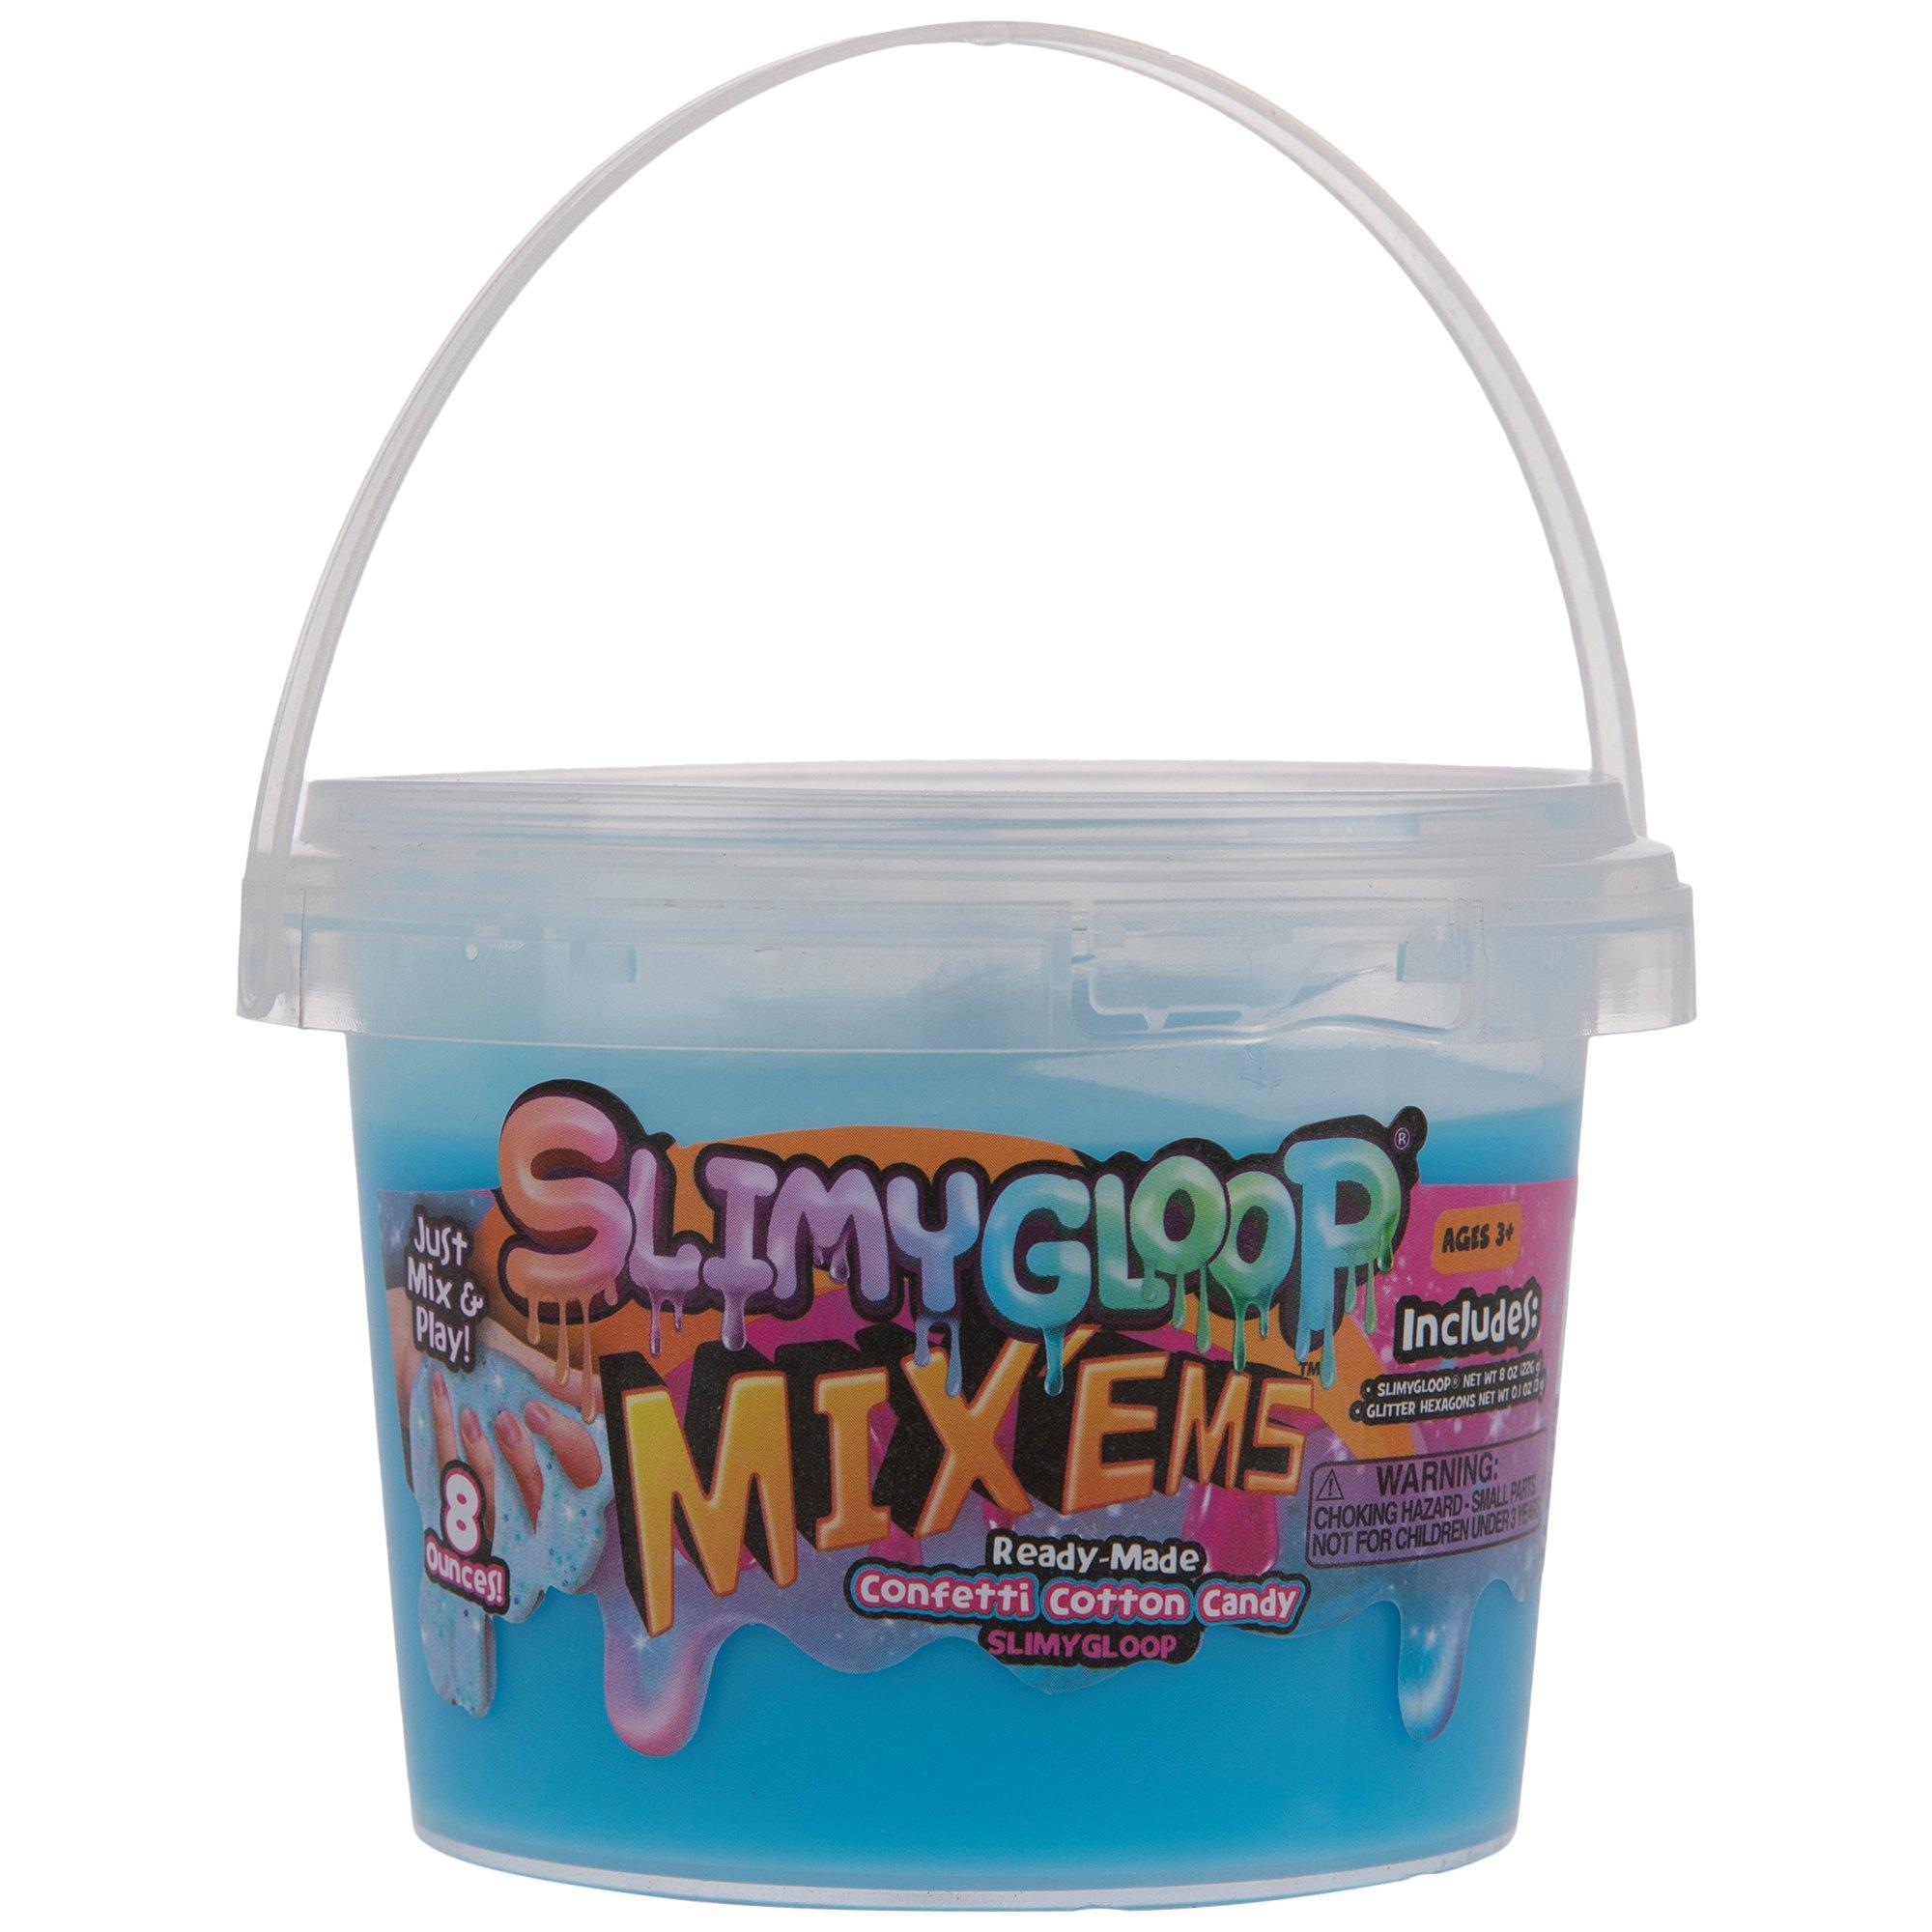 Large Box/Bag 8” x 7” x 3” - Marshmallow Foam Beads For Slime - Cotton  Candy Mix